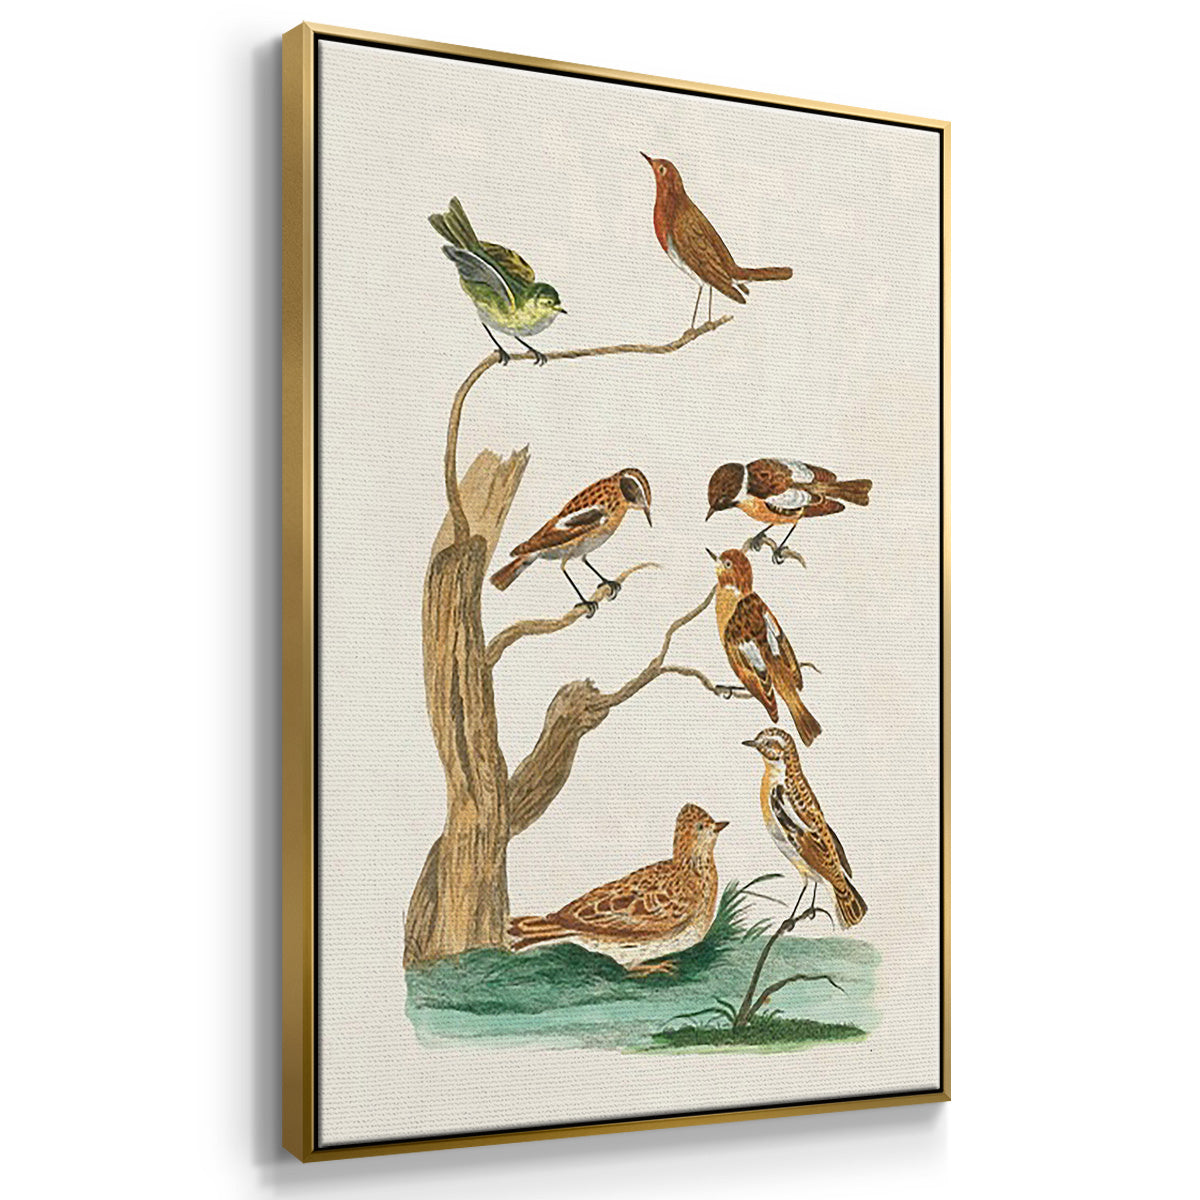 Antique Birds in Nature I - Framed Premium Gallery Wrapped Canvas L Frame 3 Piece Set - Ready to Hang